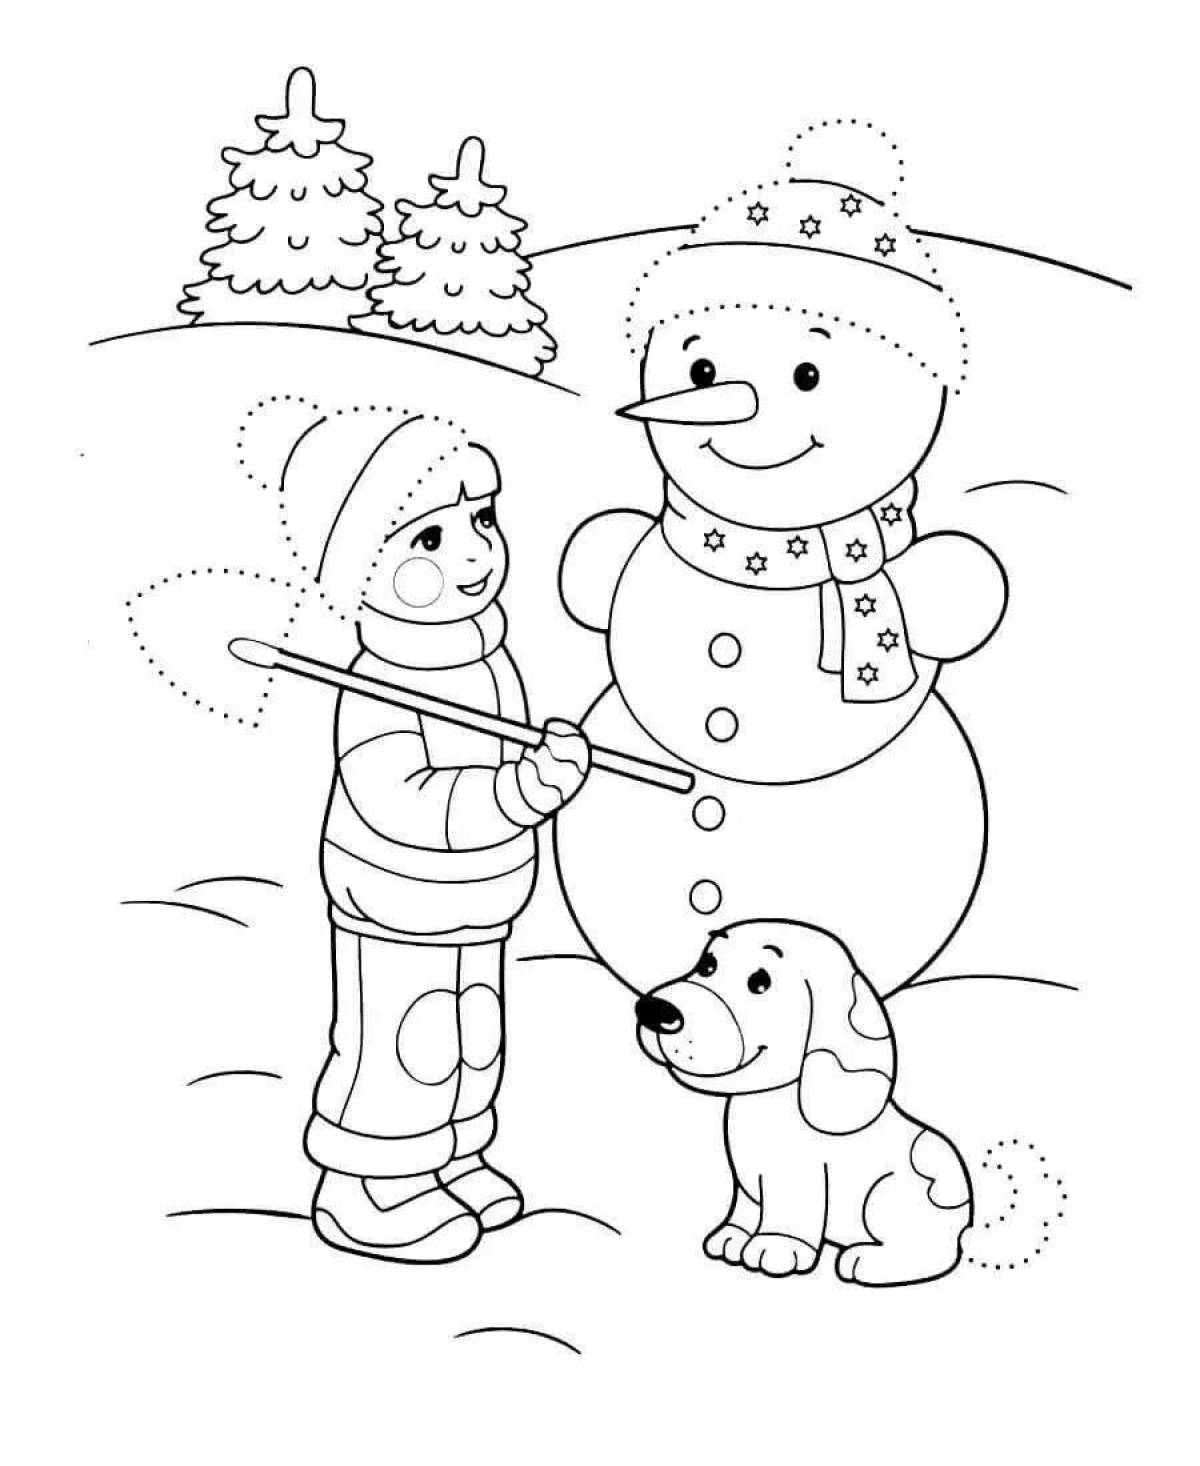 Glitter snowman coloring for kids 5 6